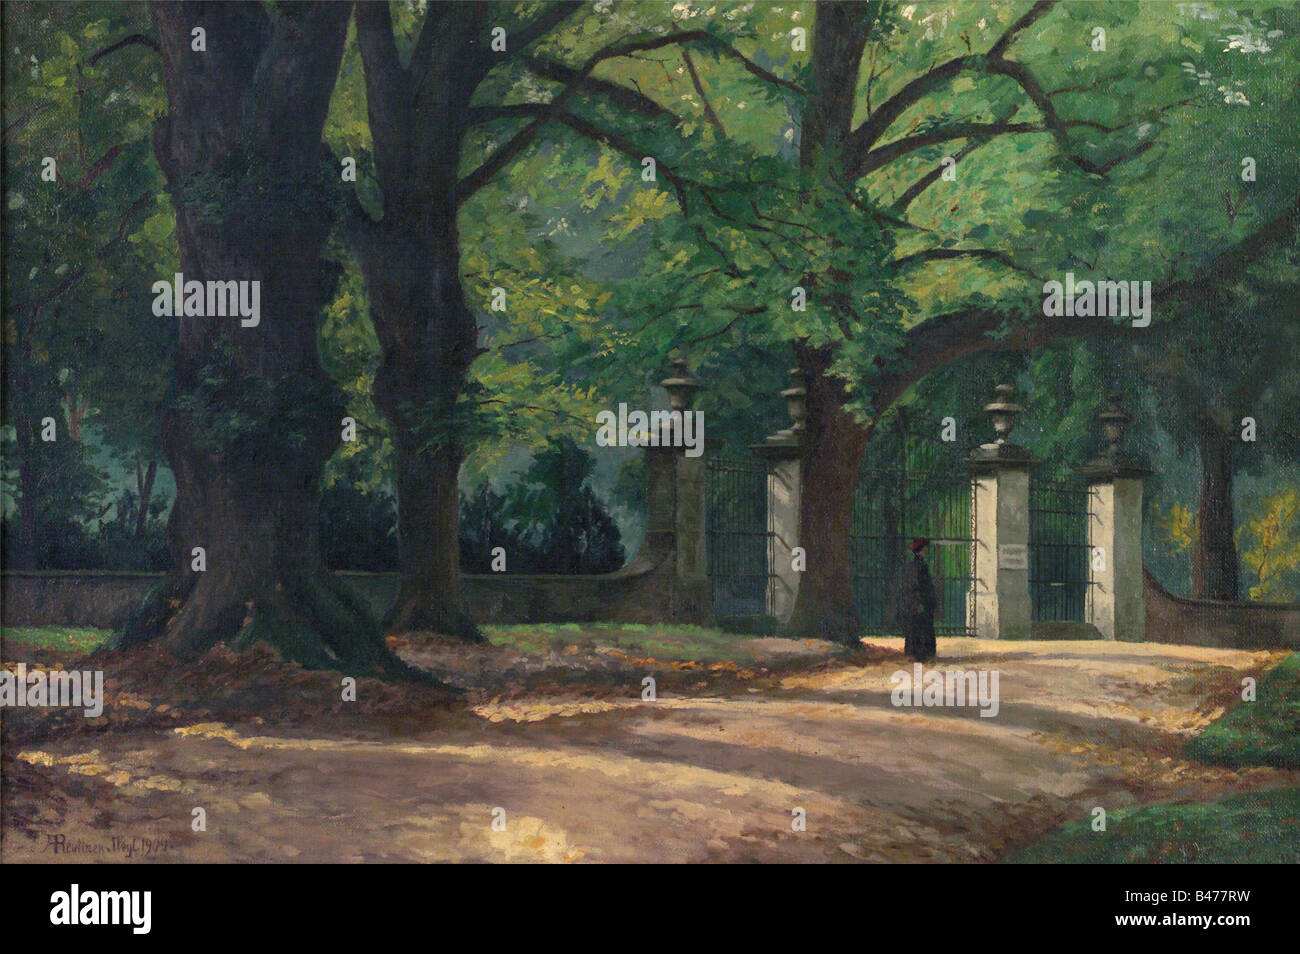 The main entrance at Weyl Castle, Achstetten near Laubheim, dated 1904. Oil on canvas, depicting a three-winged portal construction with a female figure between tall trees. Beautiful light and shadow effects. Signed 'A. Reuttner v. Weyl, 1904' at the lower left. Framed. 66 X 95 cm. fine arts, people, 1900s, 20th century, fine arts, art, painting, paintings, Additional-Rights-Clearance-Info-Not-Available Stock Photo